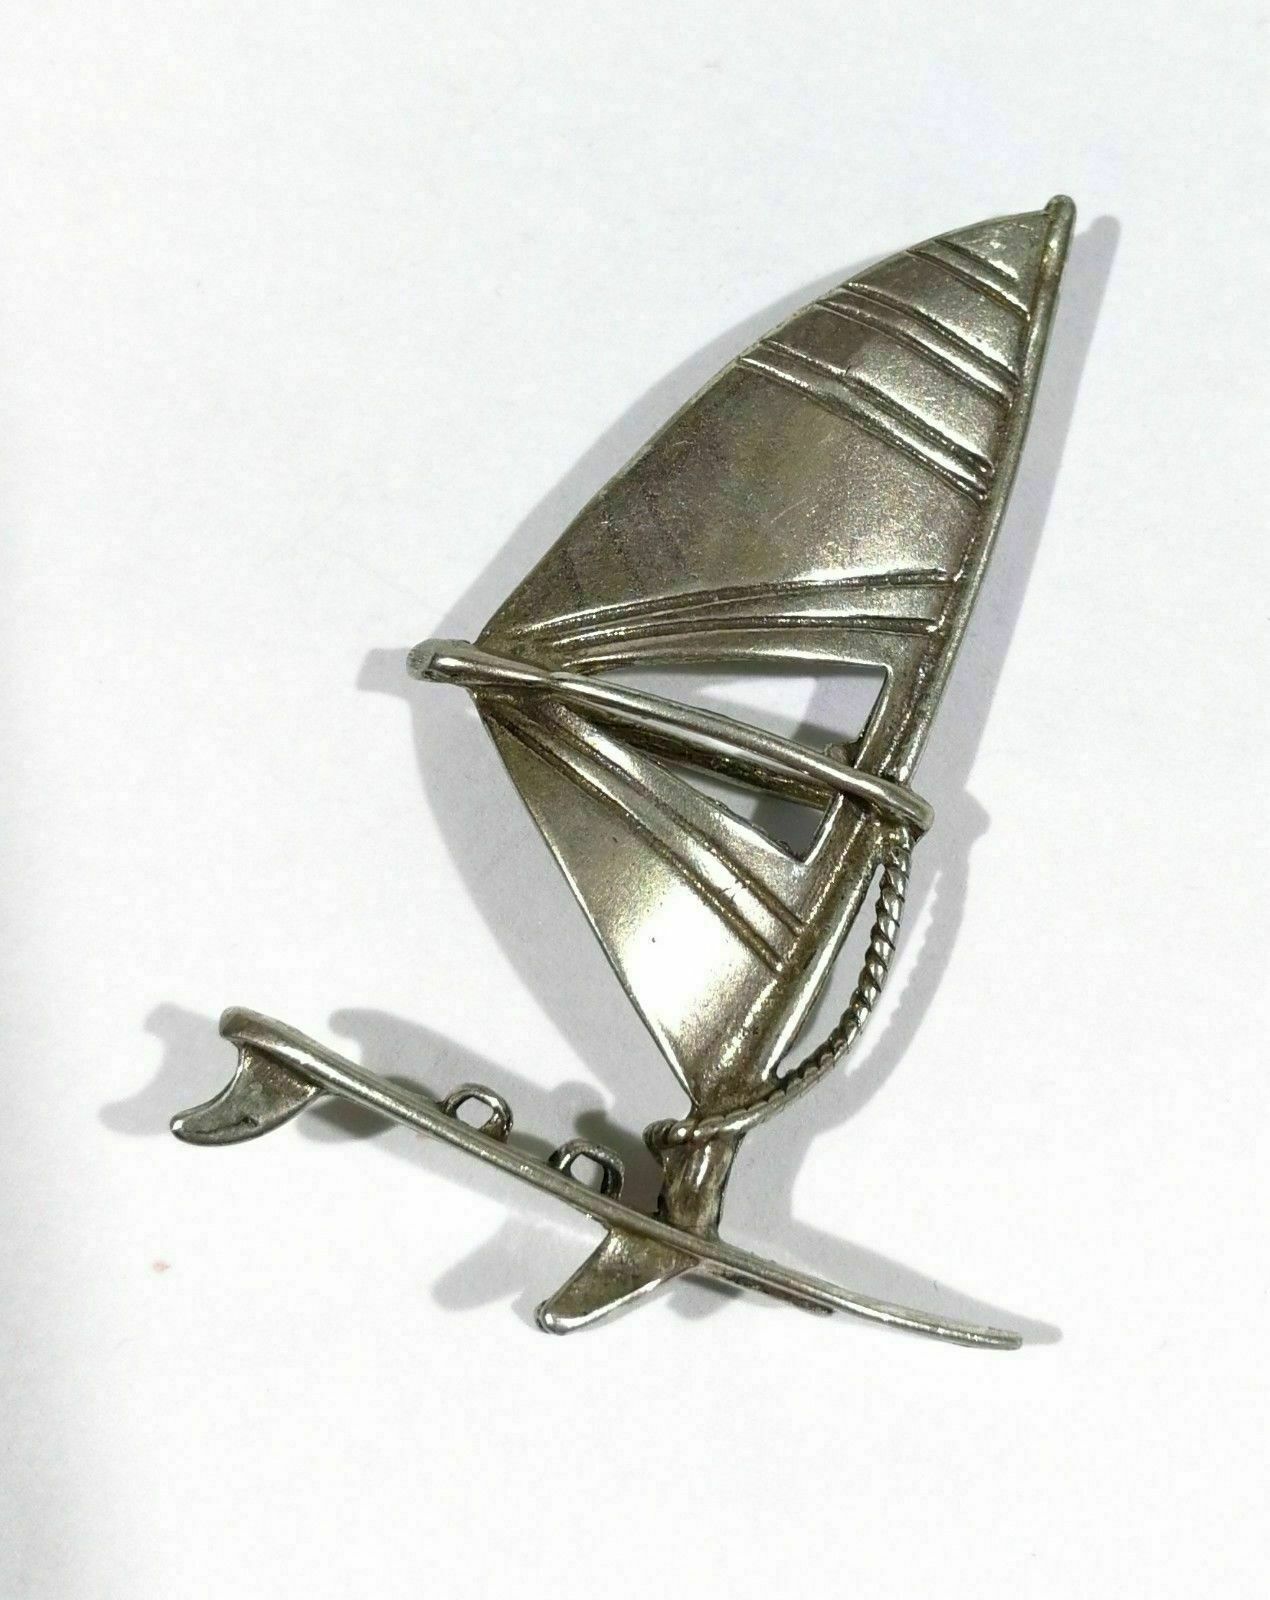 Vintage miniature surfboard solid silver 800 - 5,9g